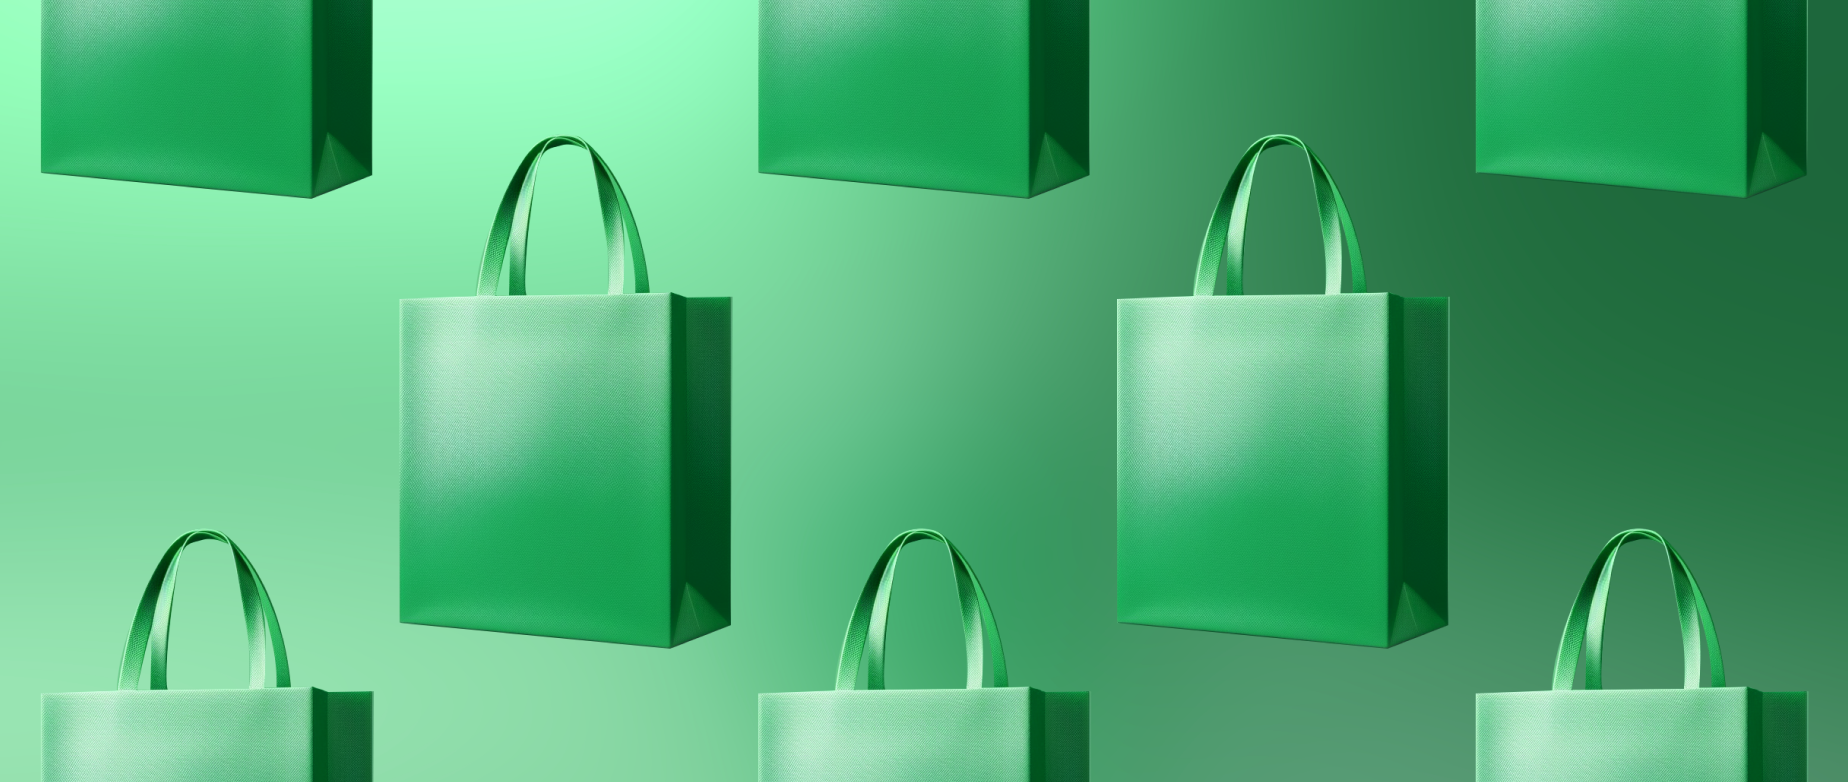 green shopping bags: sales cycle